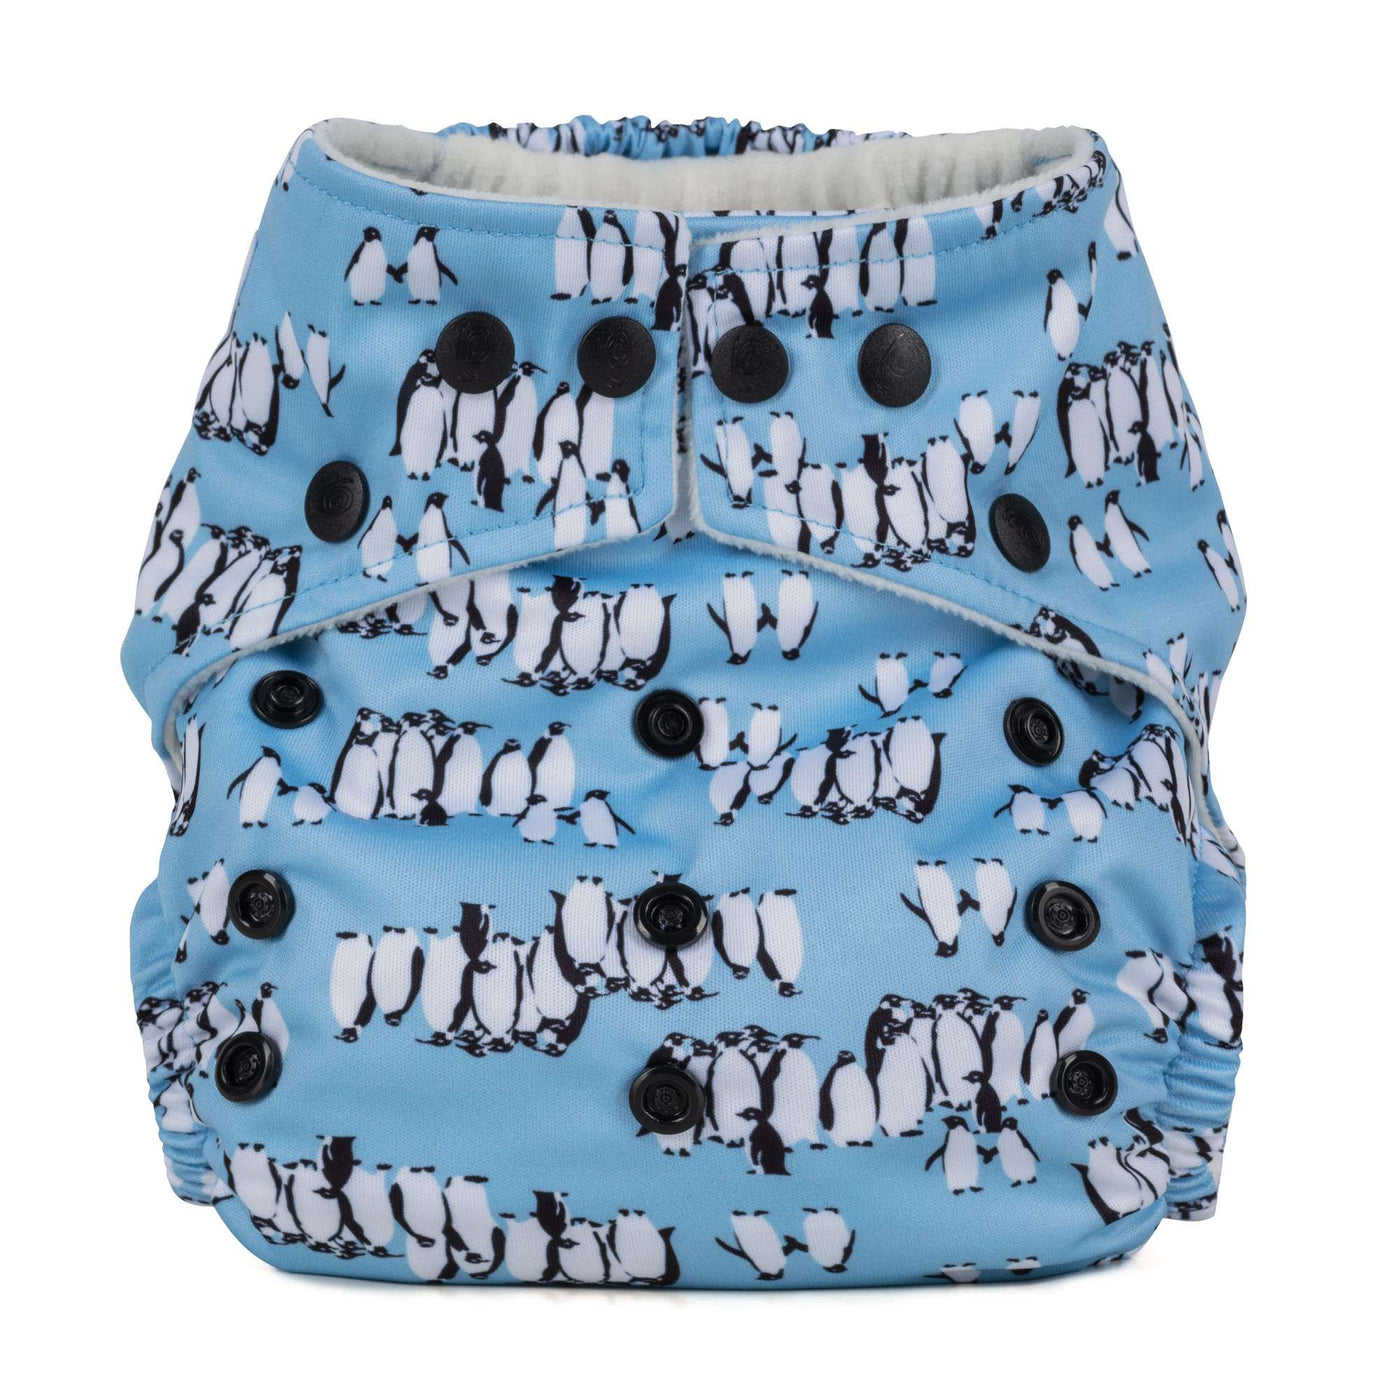 Baba+Boo One Size Reusable Nappy - Penguins